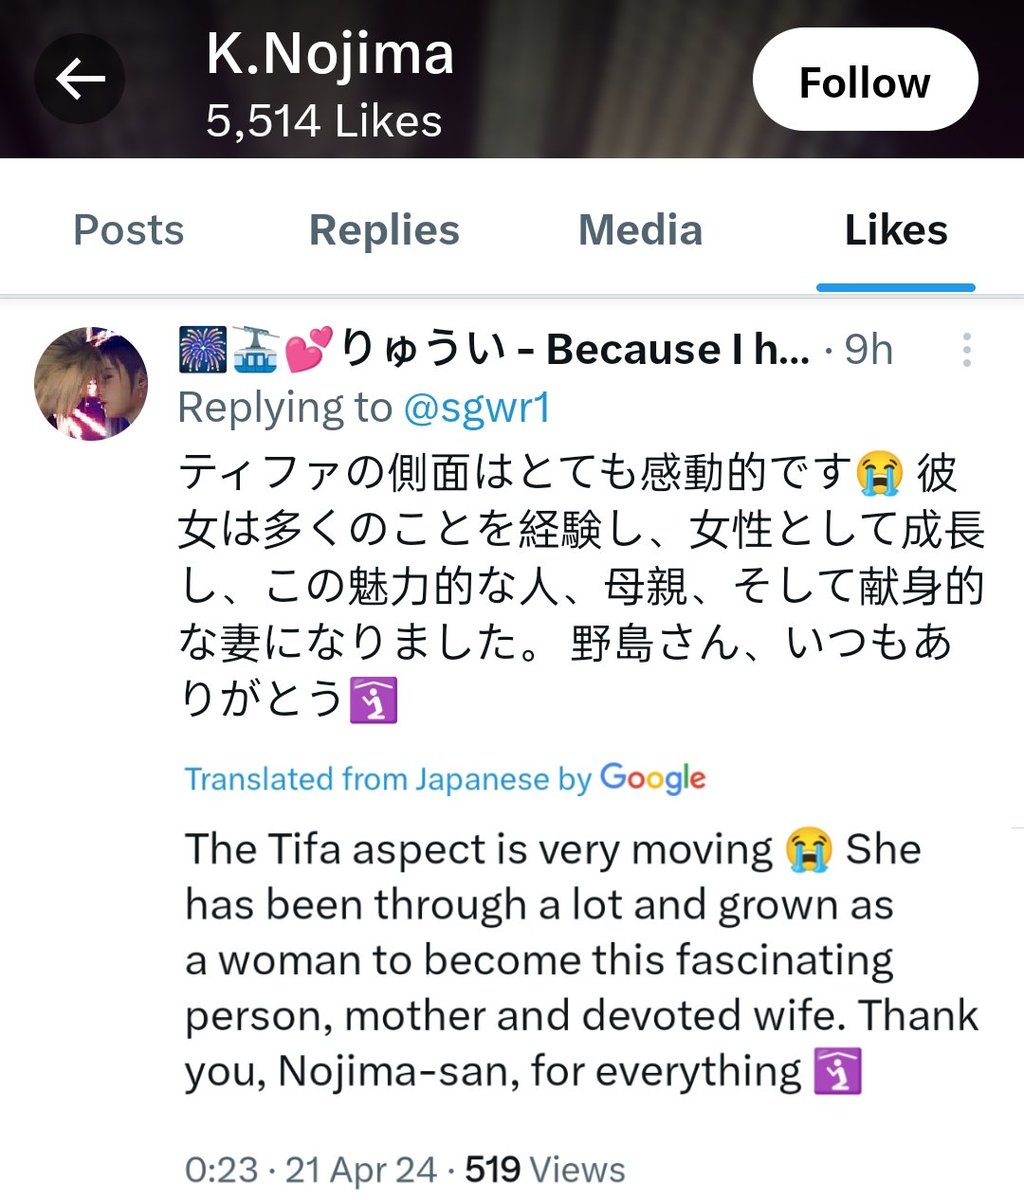 So.... Nojima liked a comment asking about Zack and Cloud's version of ToTP and a comment about Tifa being 'a devoted wife'

👀👀